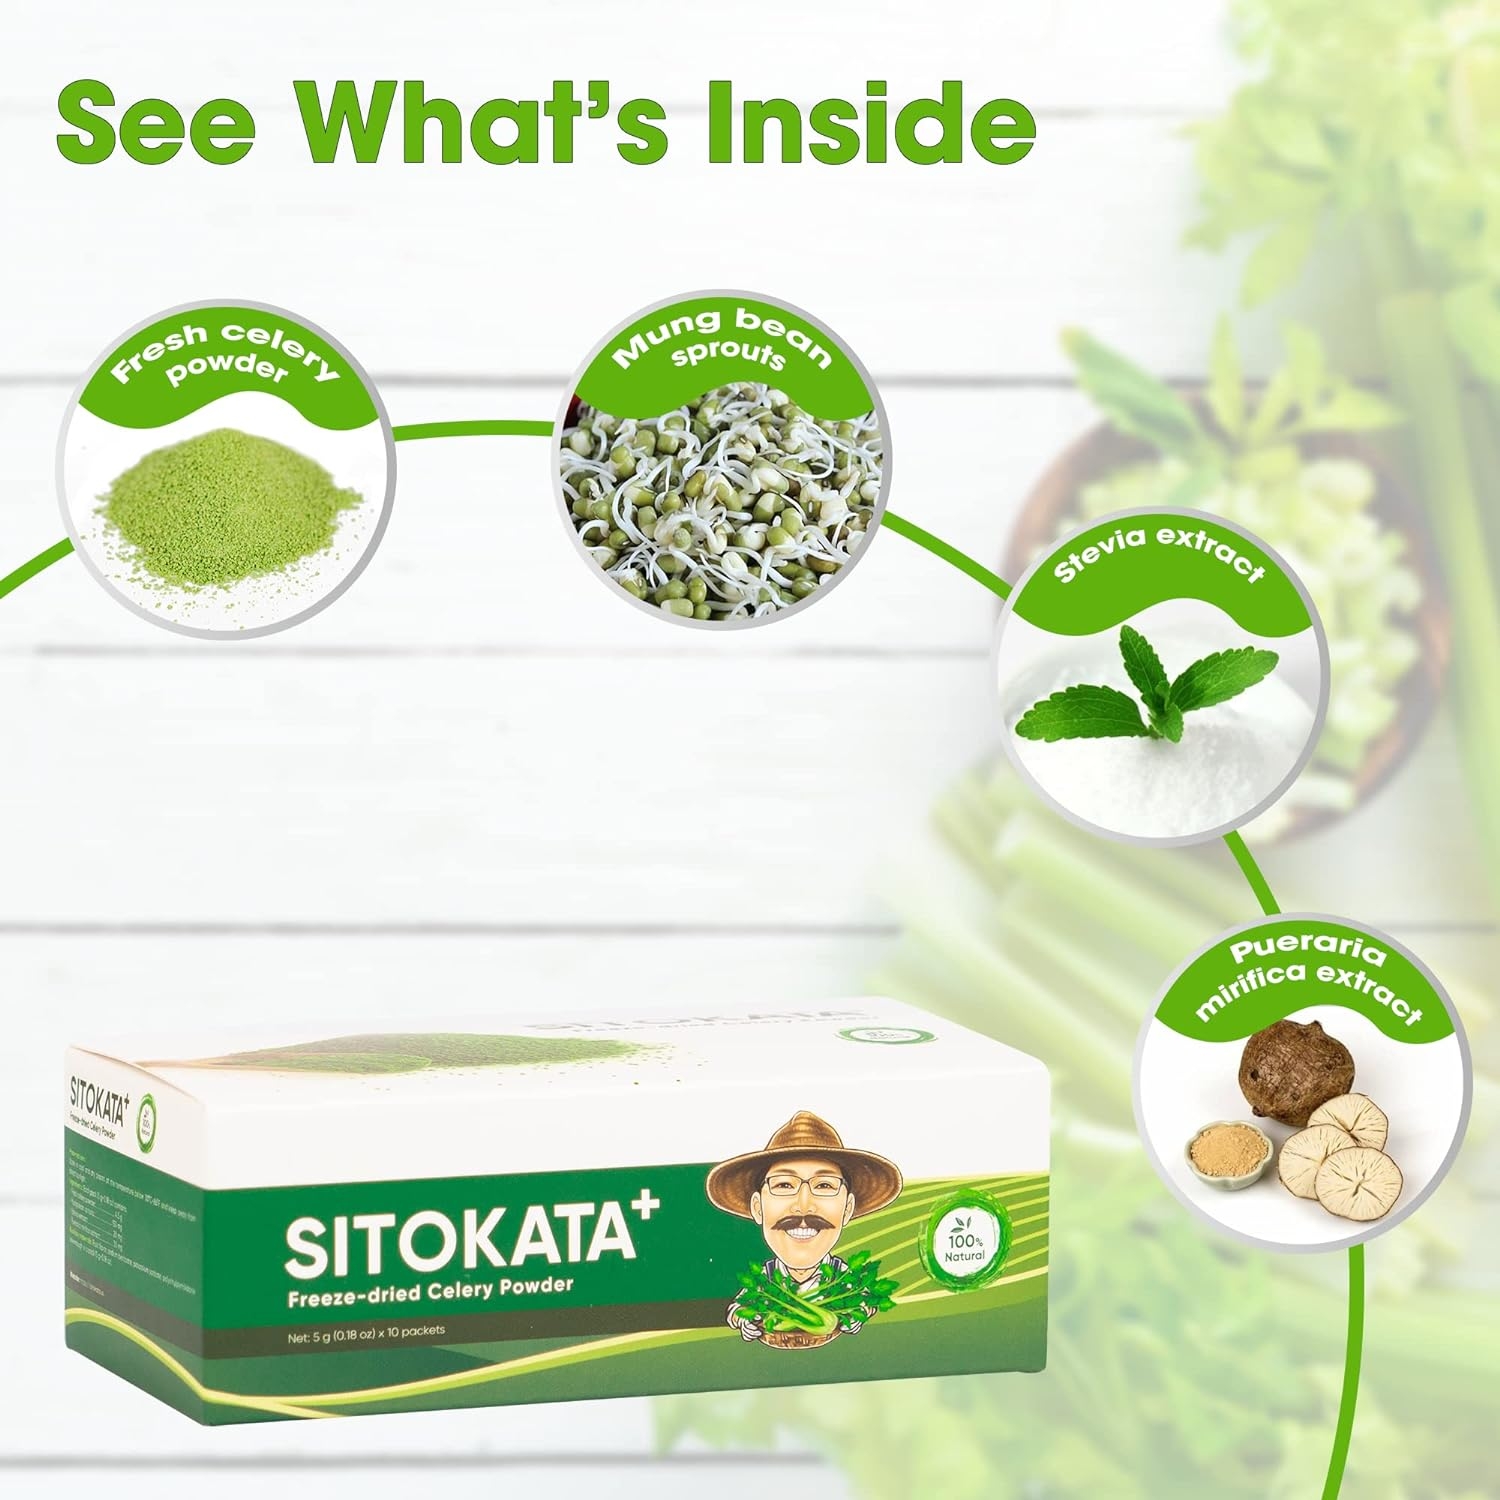 Sitokata Organic Celery Powder Supports Healthy Digestion, 100% Natural Celery Detox and Cold Pressed, Supports Body Detox and Cleanse, Rich in Immune Vitamin C and Minerals (1 Box of 10 Servings)